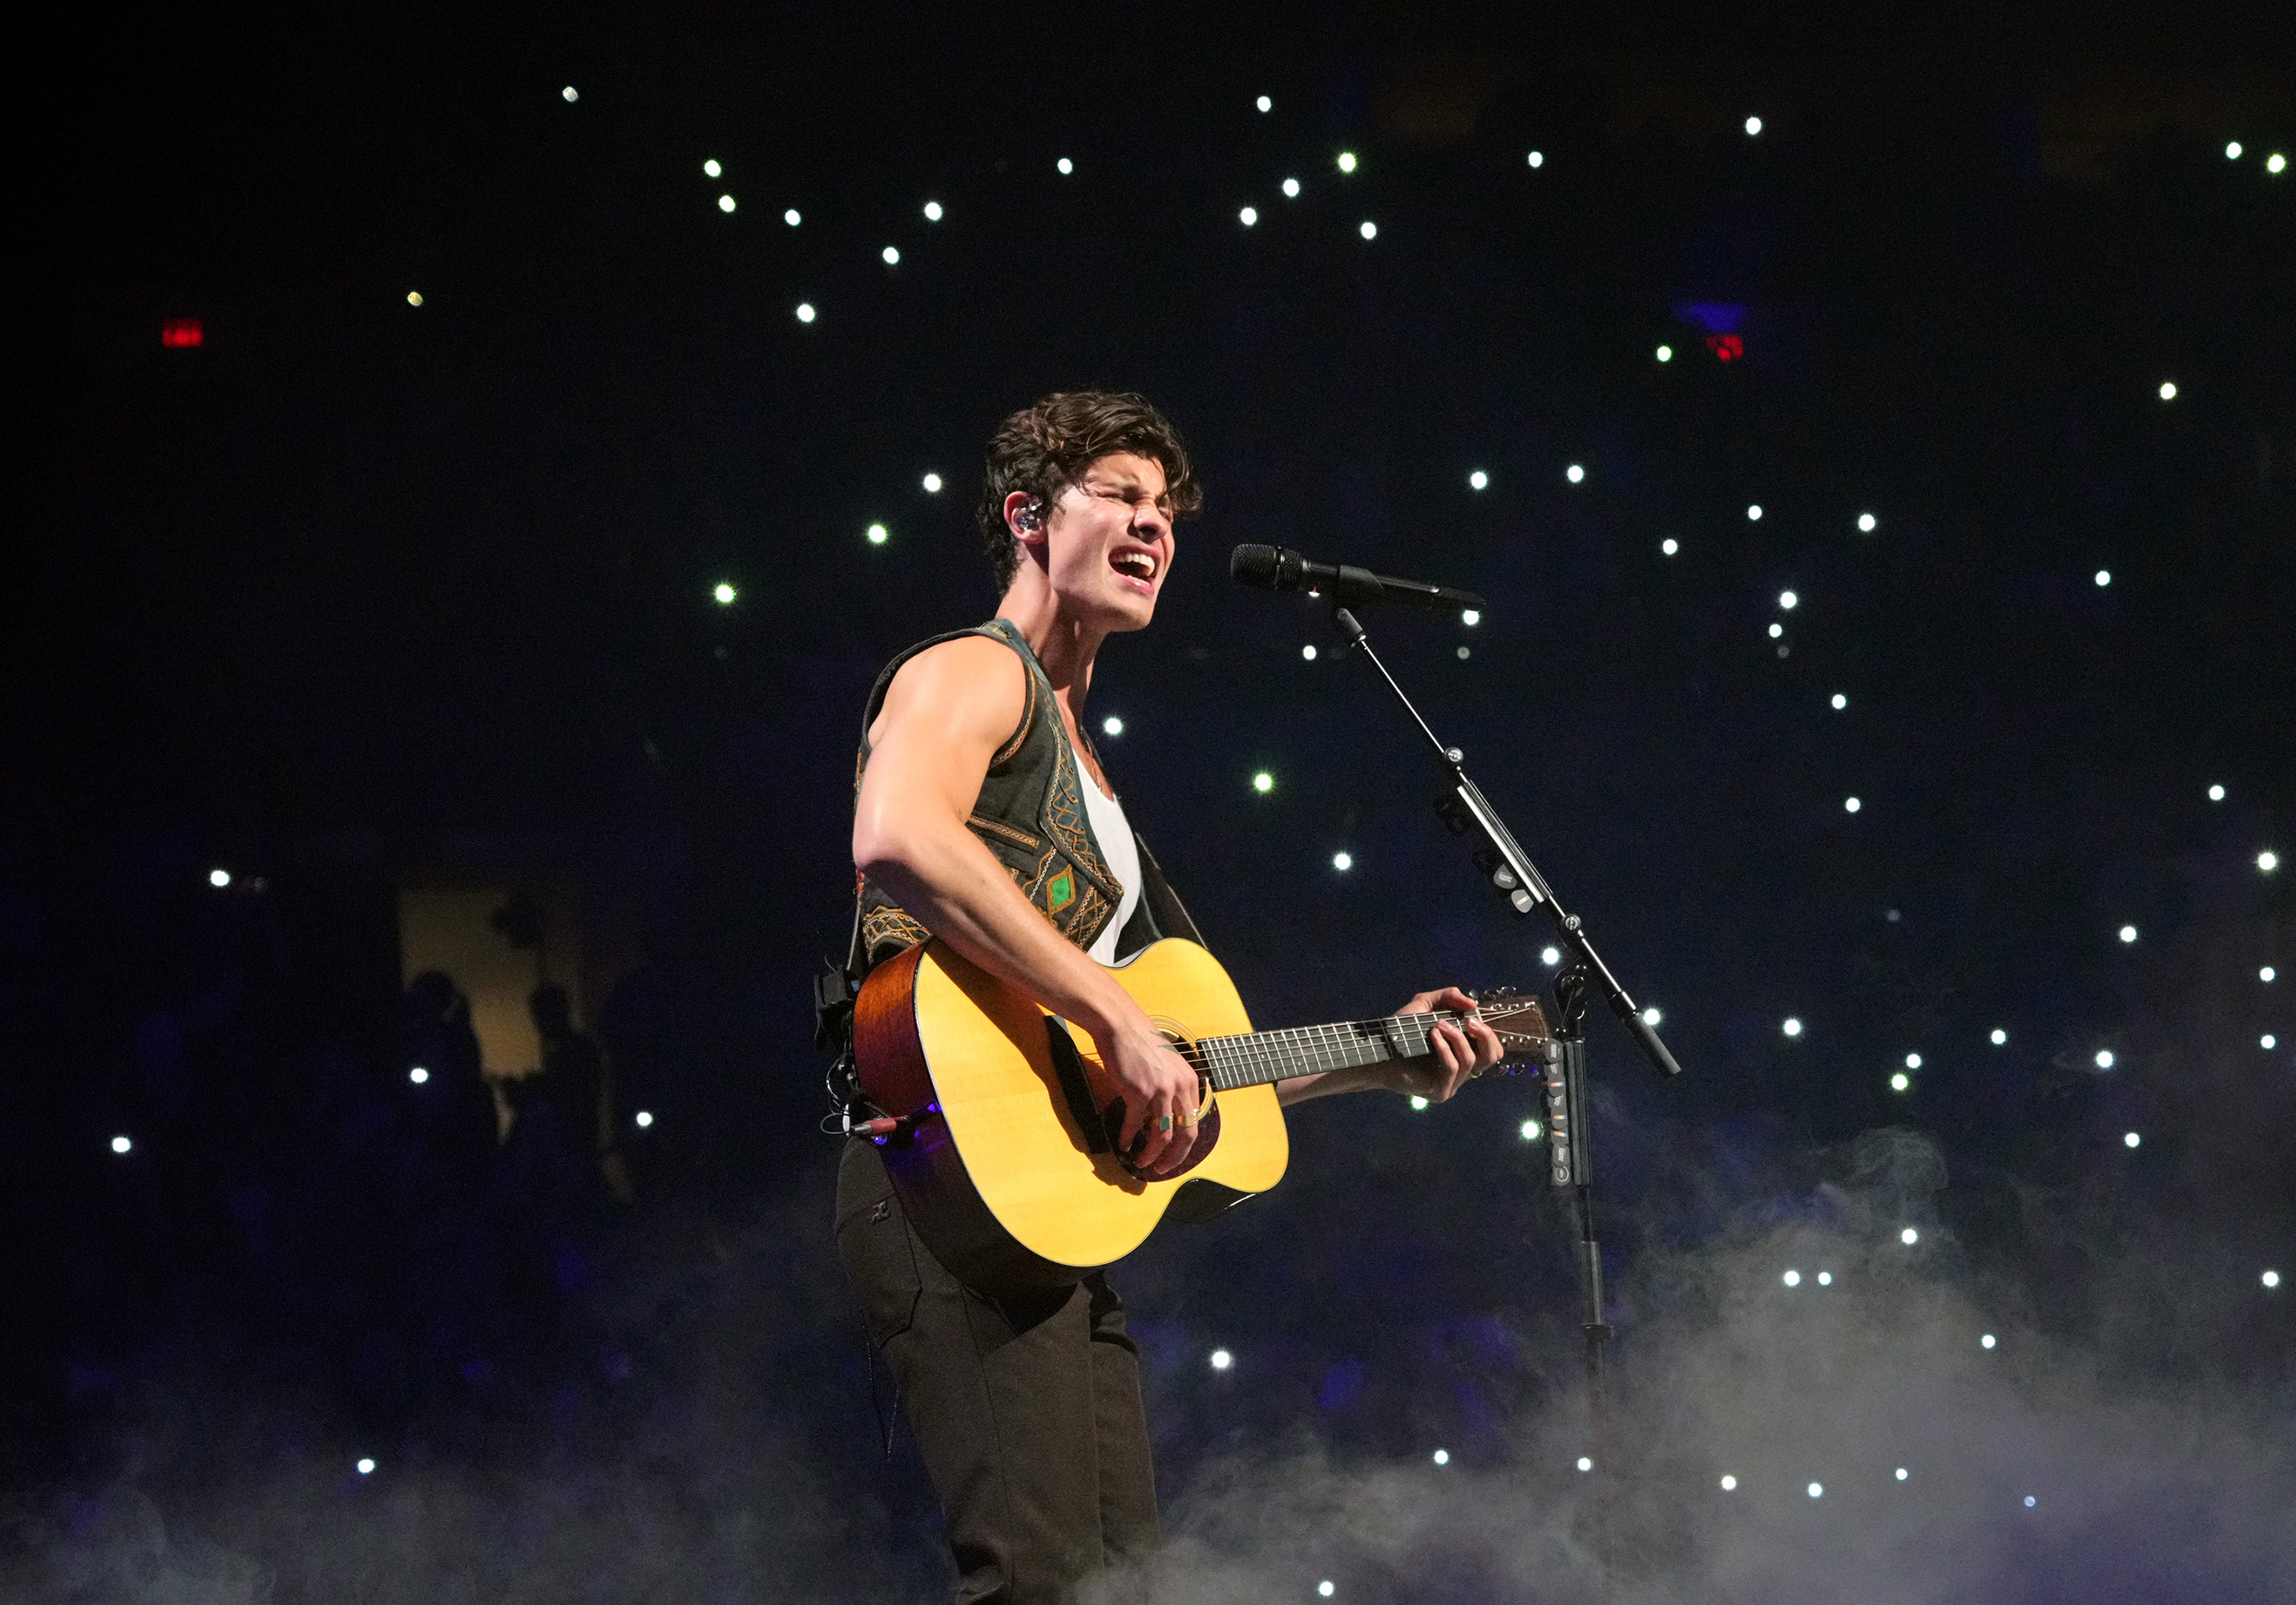 Shawn Mendes cancels the rest of his tour citing mental health challenges